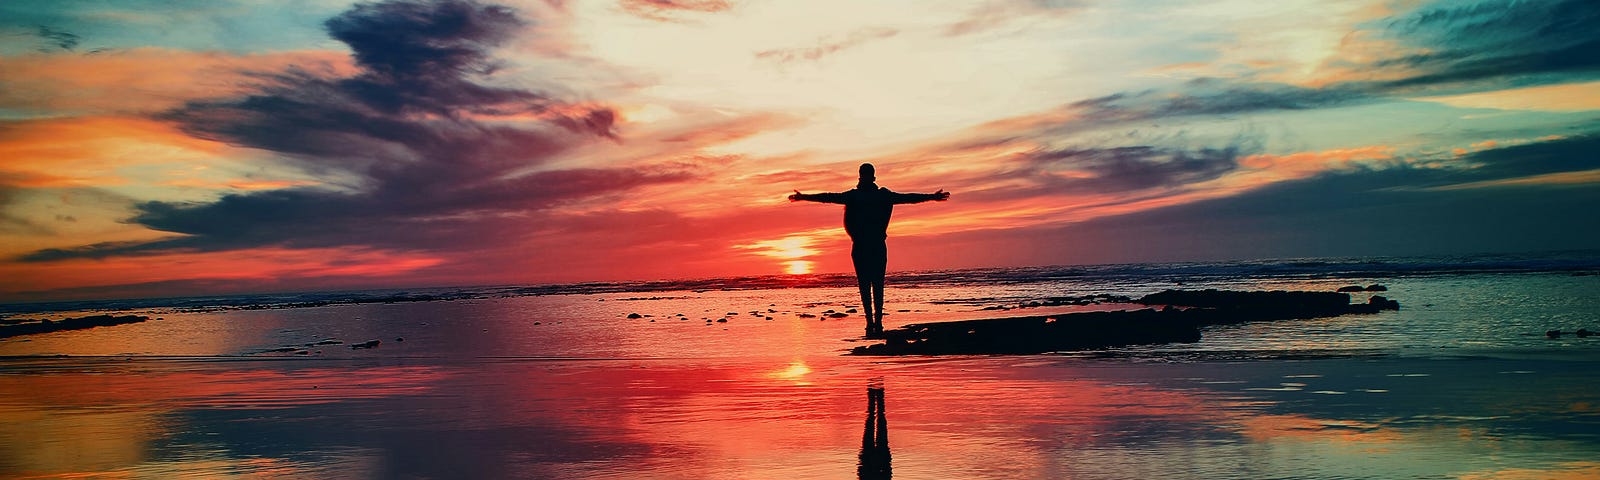 This is a picture of a brilliant sunset. A silhouette stands on the beach where the waves meet the shore, arms outstretched in the form of a cross, giving the image a spiritual feel.